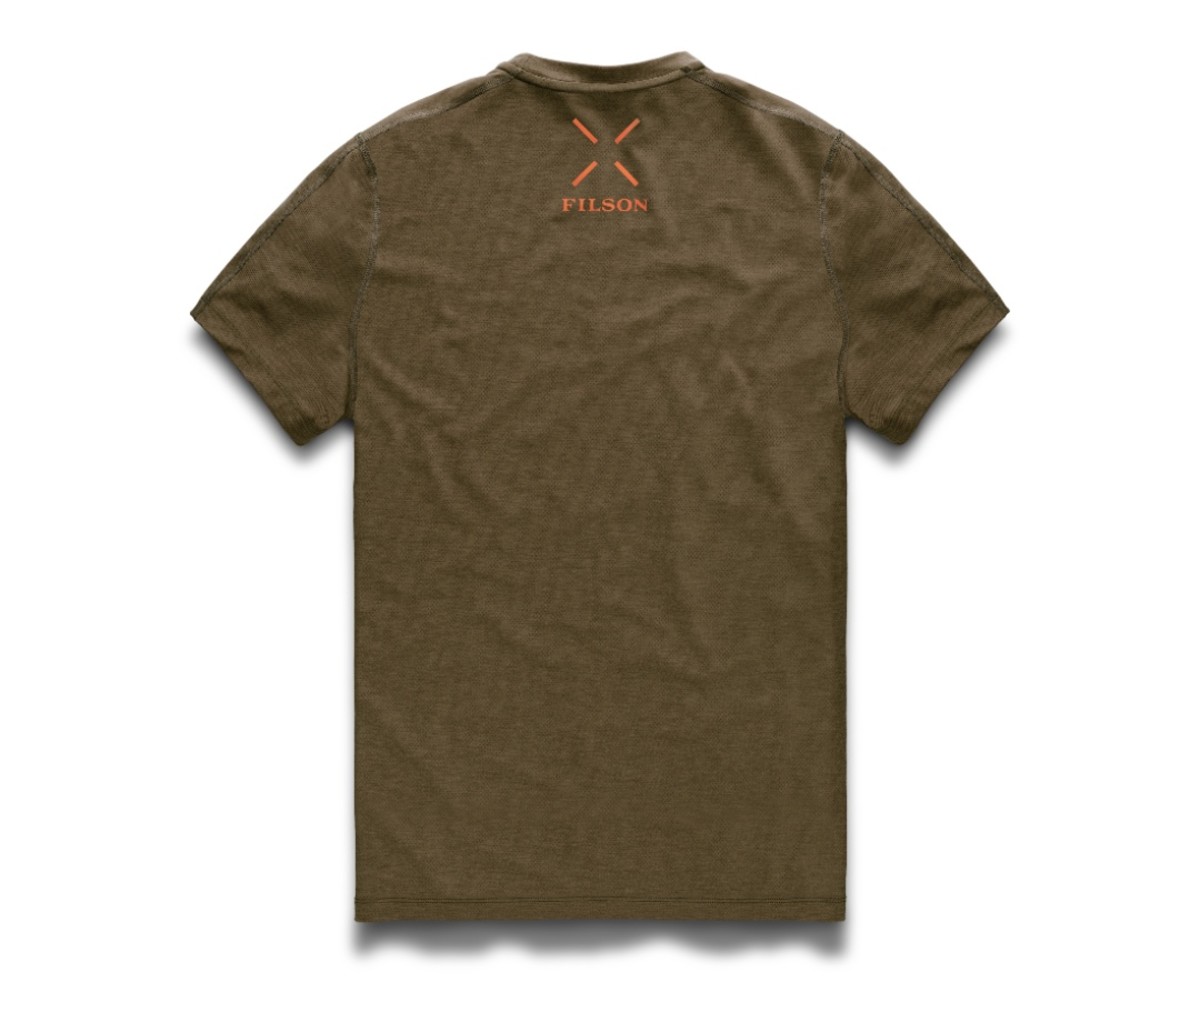 Pick up some advanced workout gear from the new Filson x Ten Thousand fitness apparel collaboration.